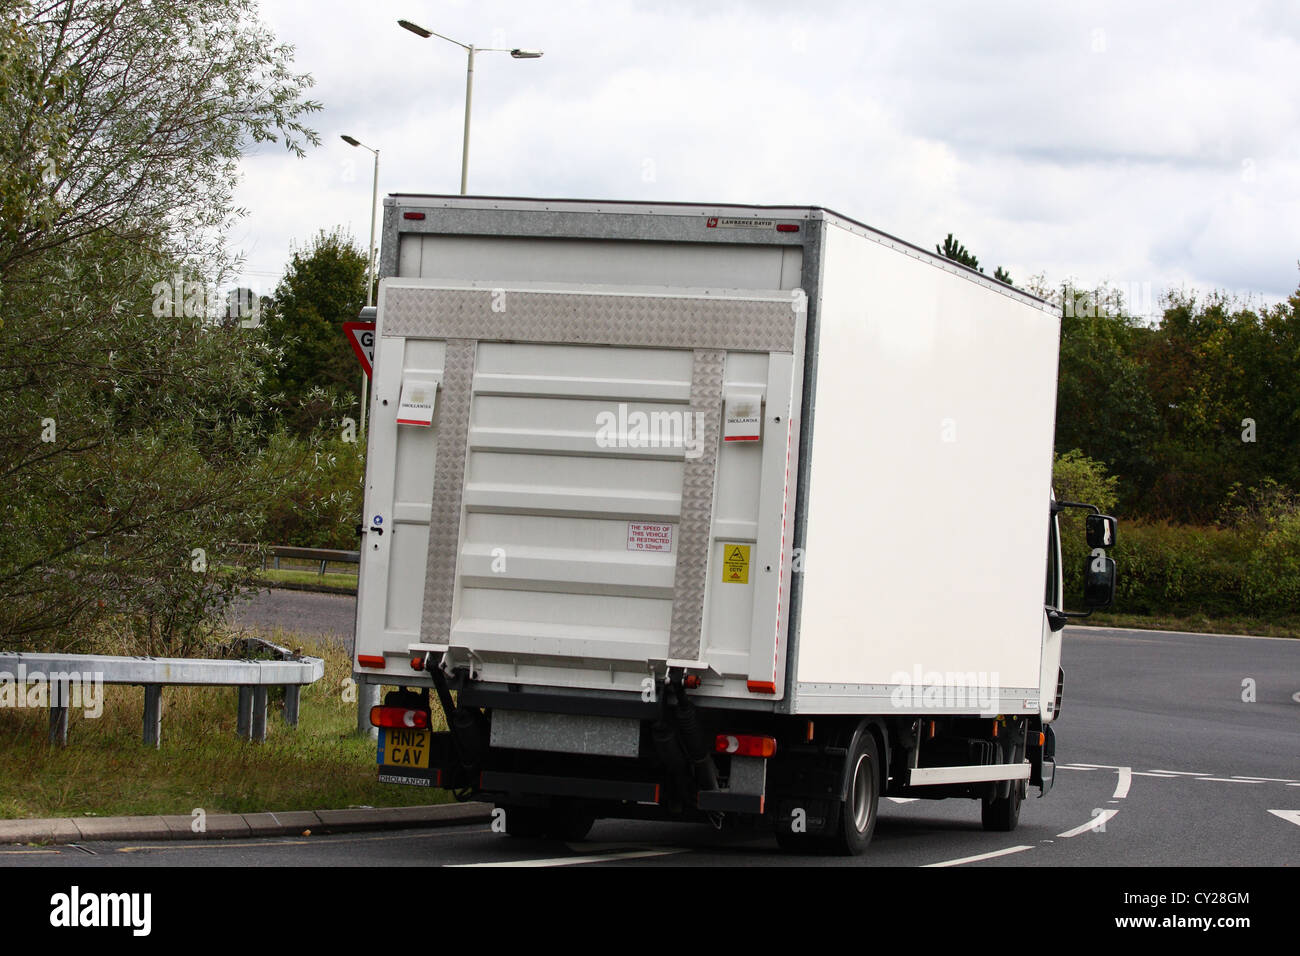 An unmarked truck traveling along a road in England Stock Photo